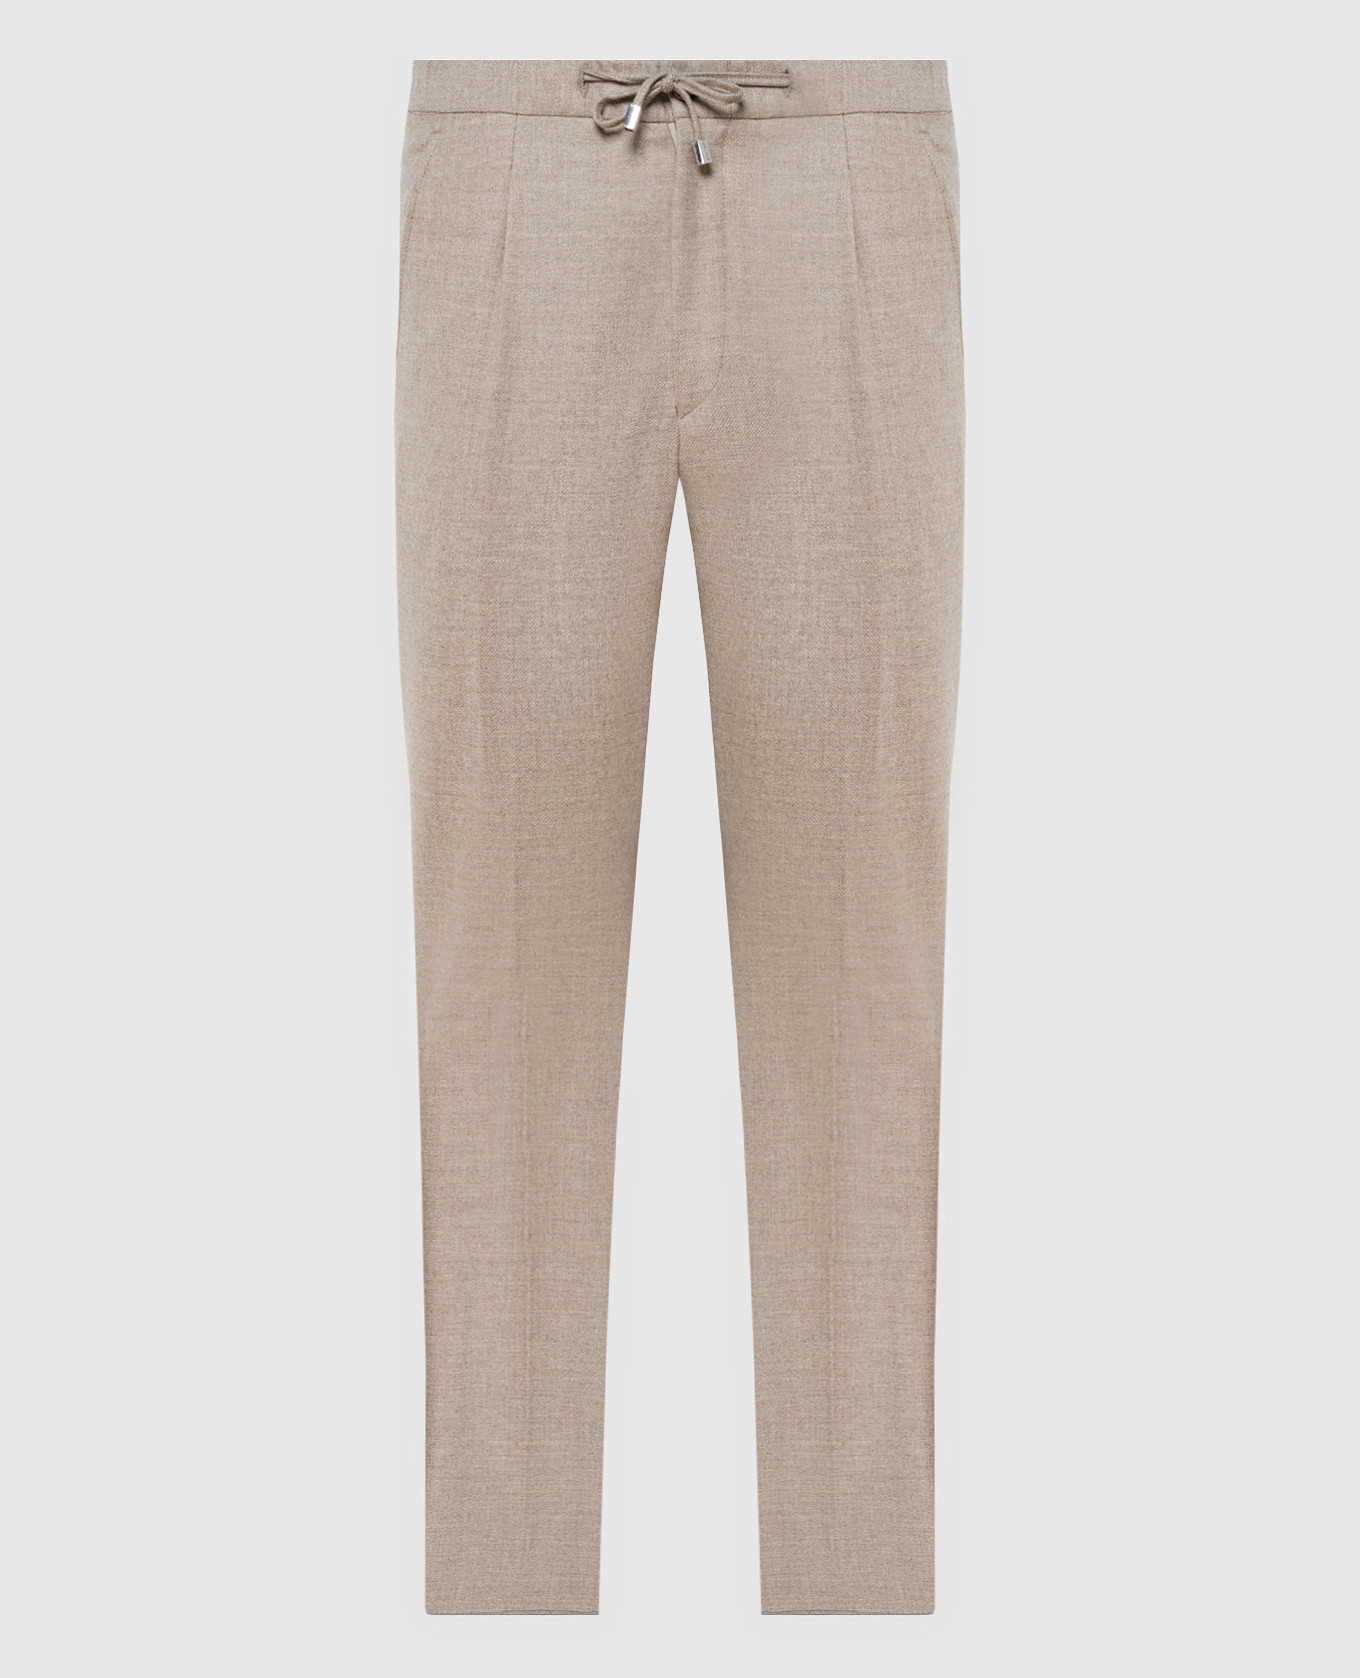 Beige pants made of wool and cashmere with snaps